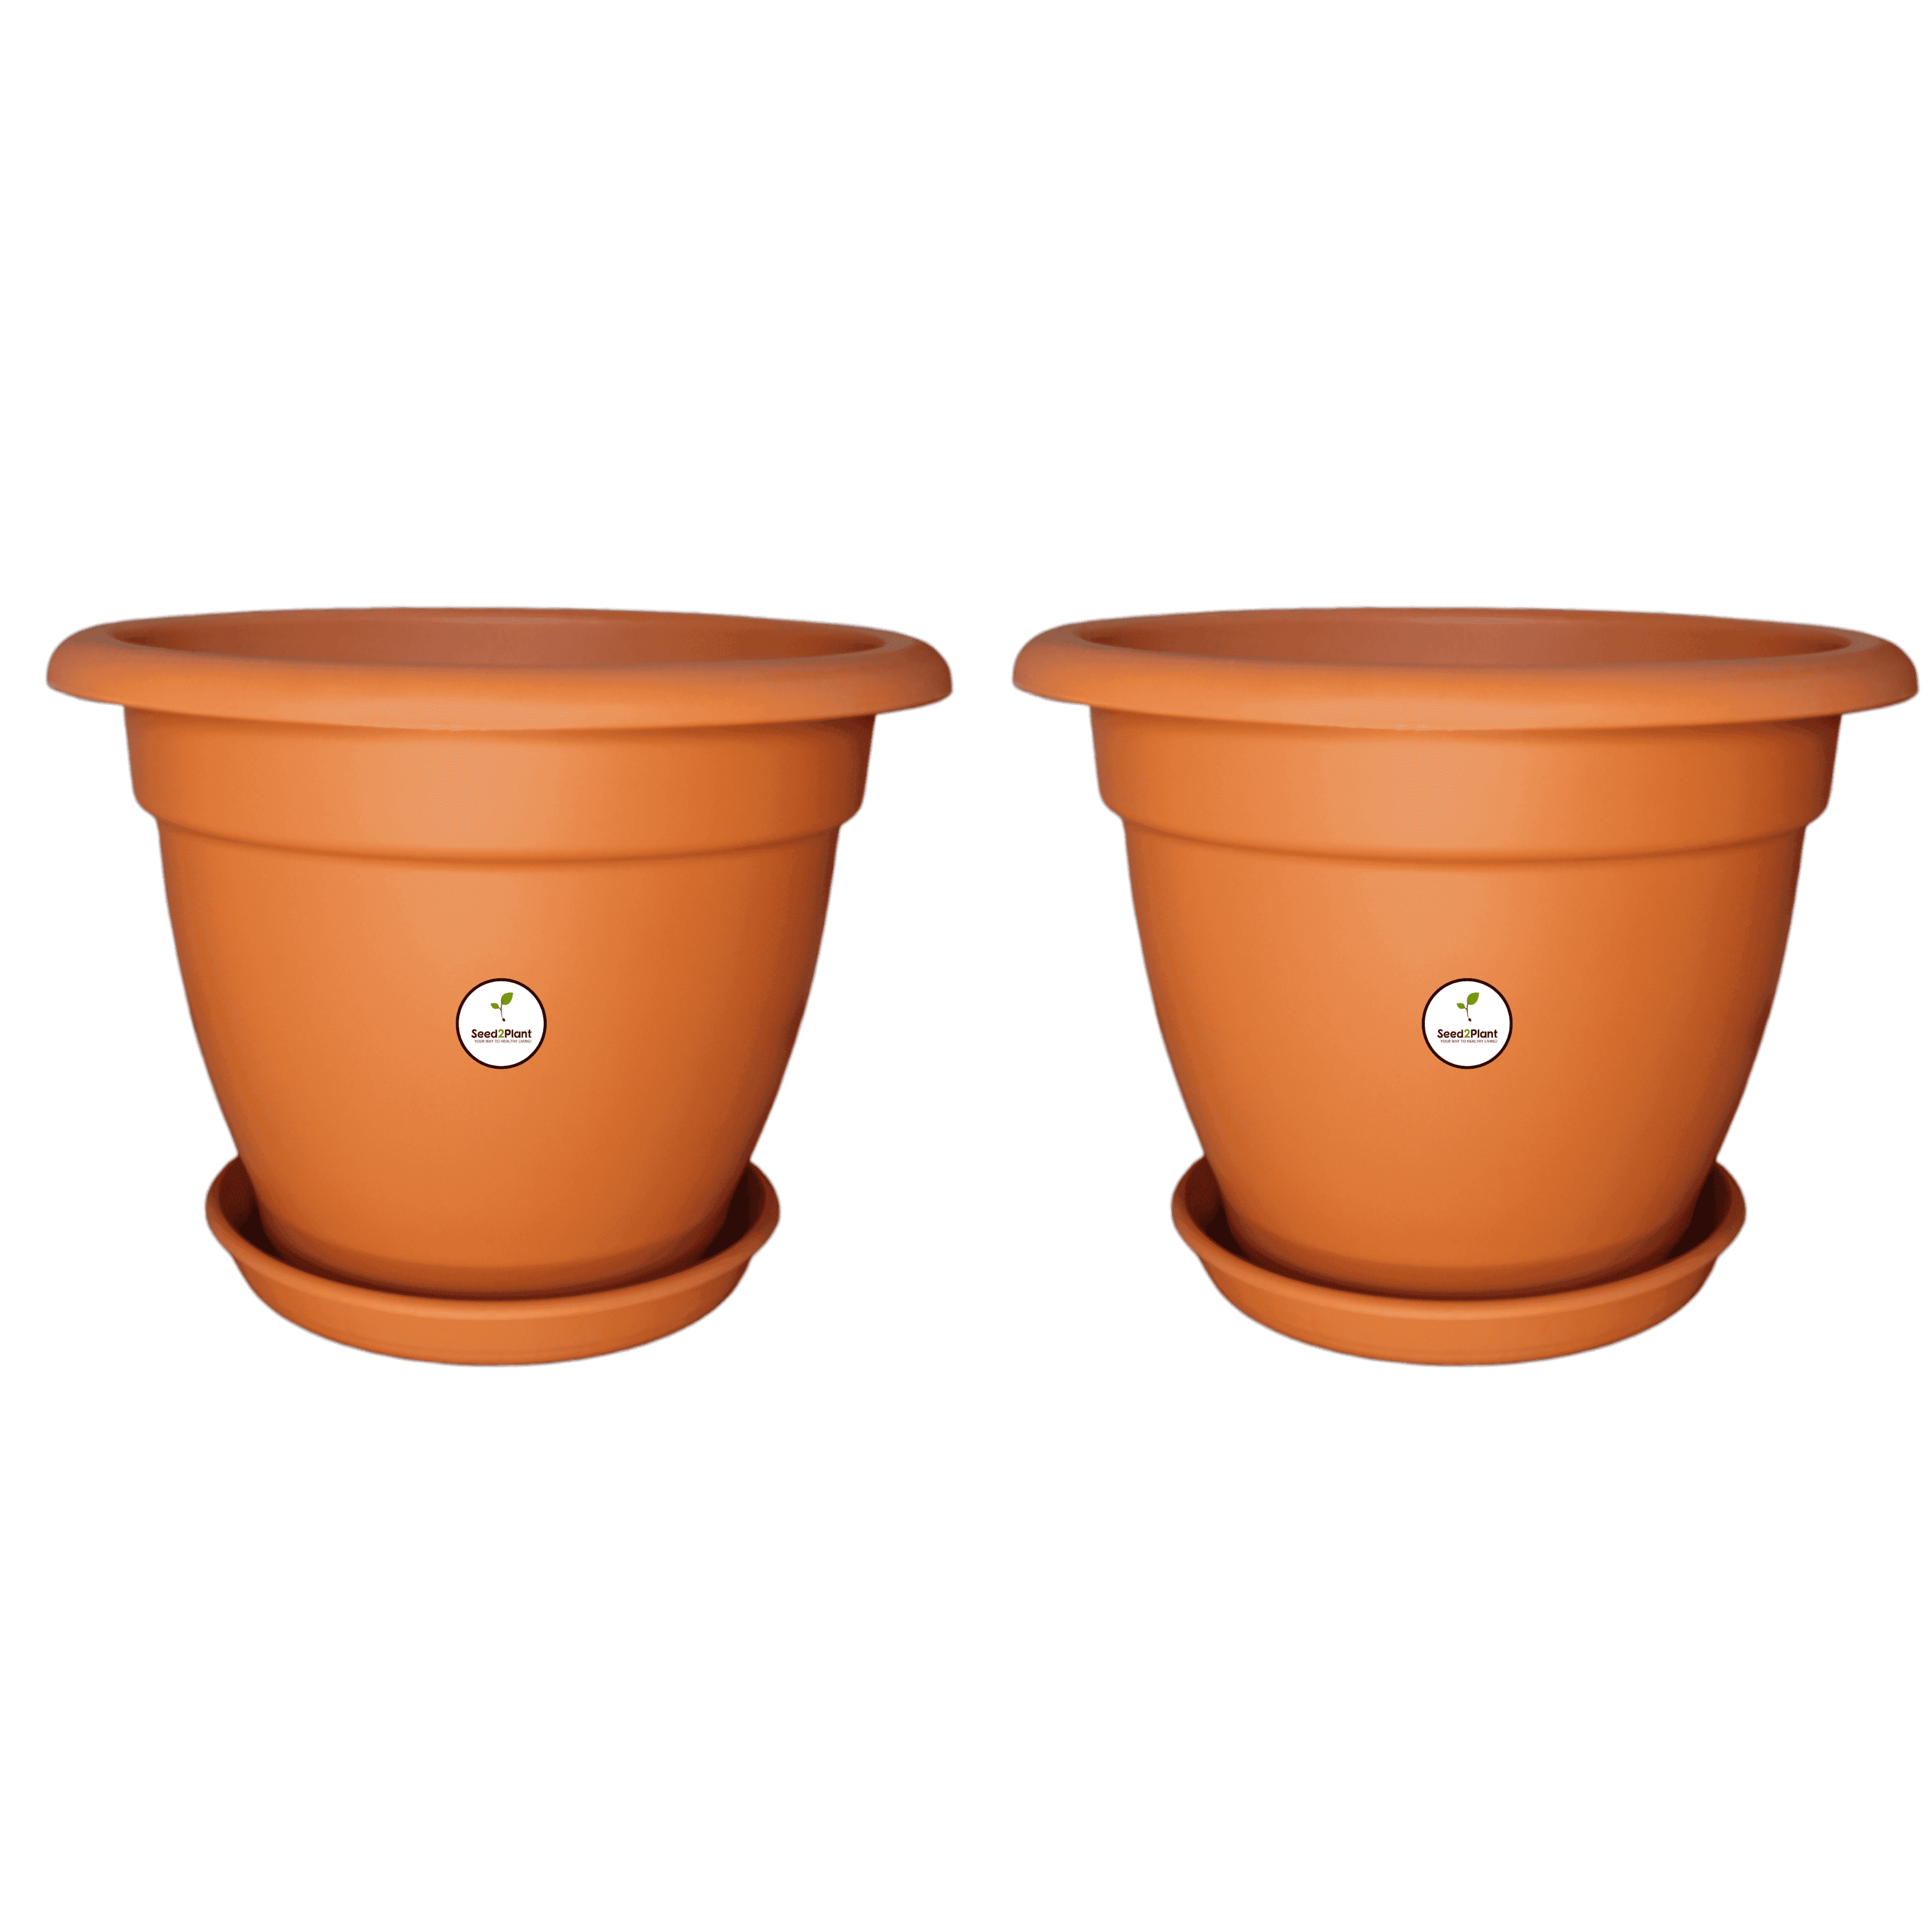 30 Inches (2.5 Feet) Huge Plastic Pots for Trees UV Treated - Terracotta Colour